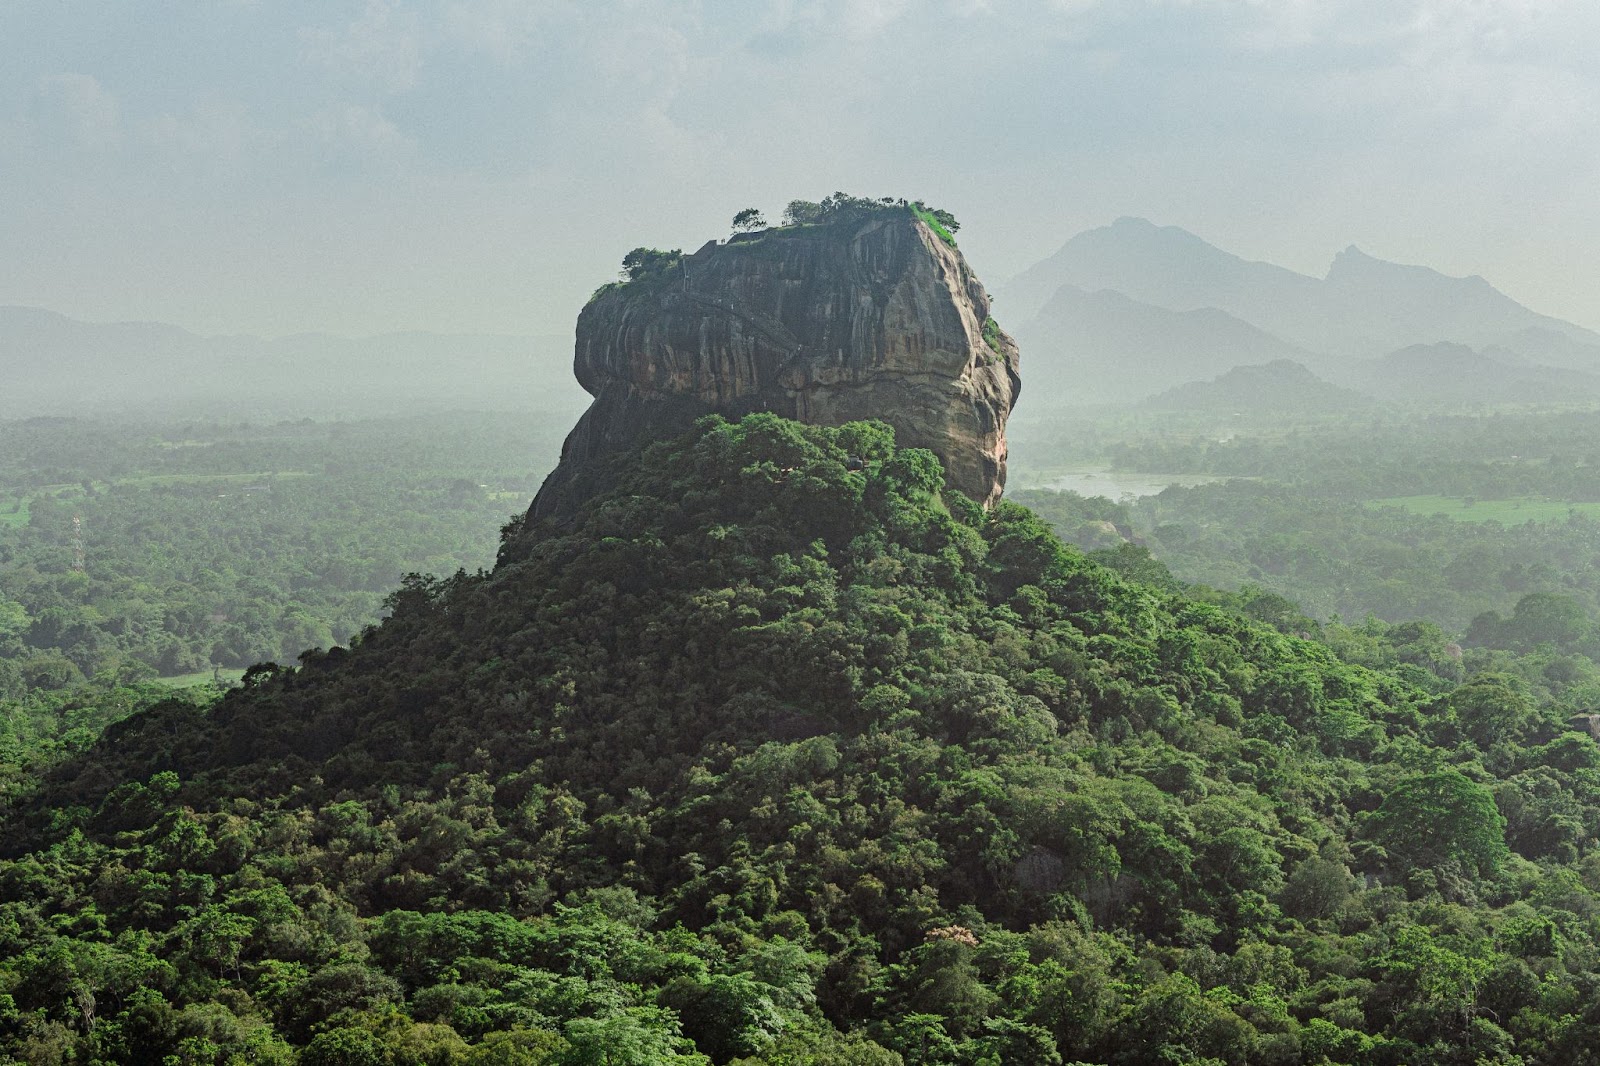 The citadel on top of Sigiriya was built by King Kasyapa who ruled from 477 to 495 CE